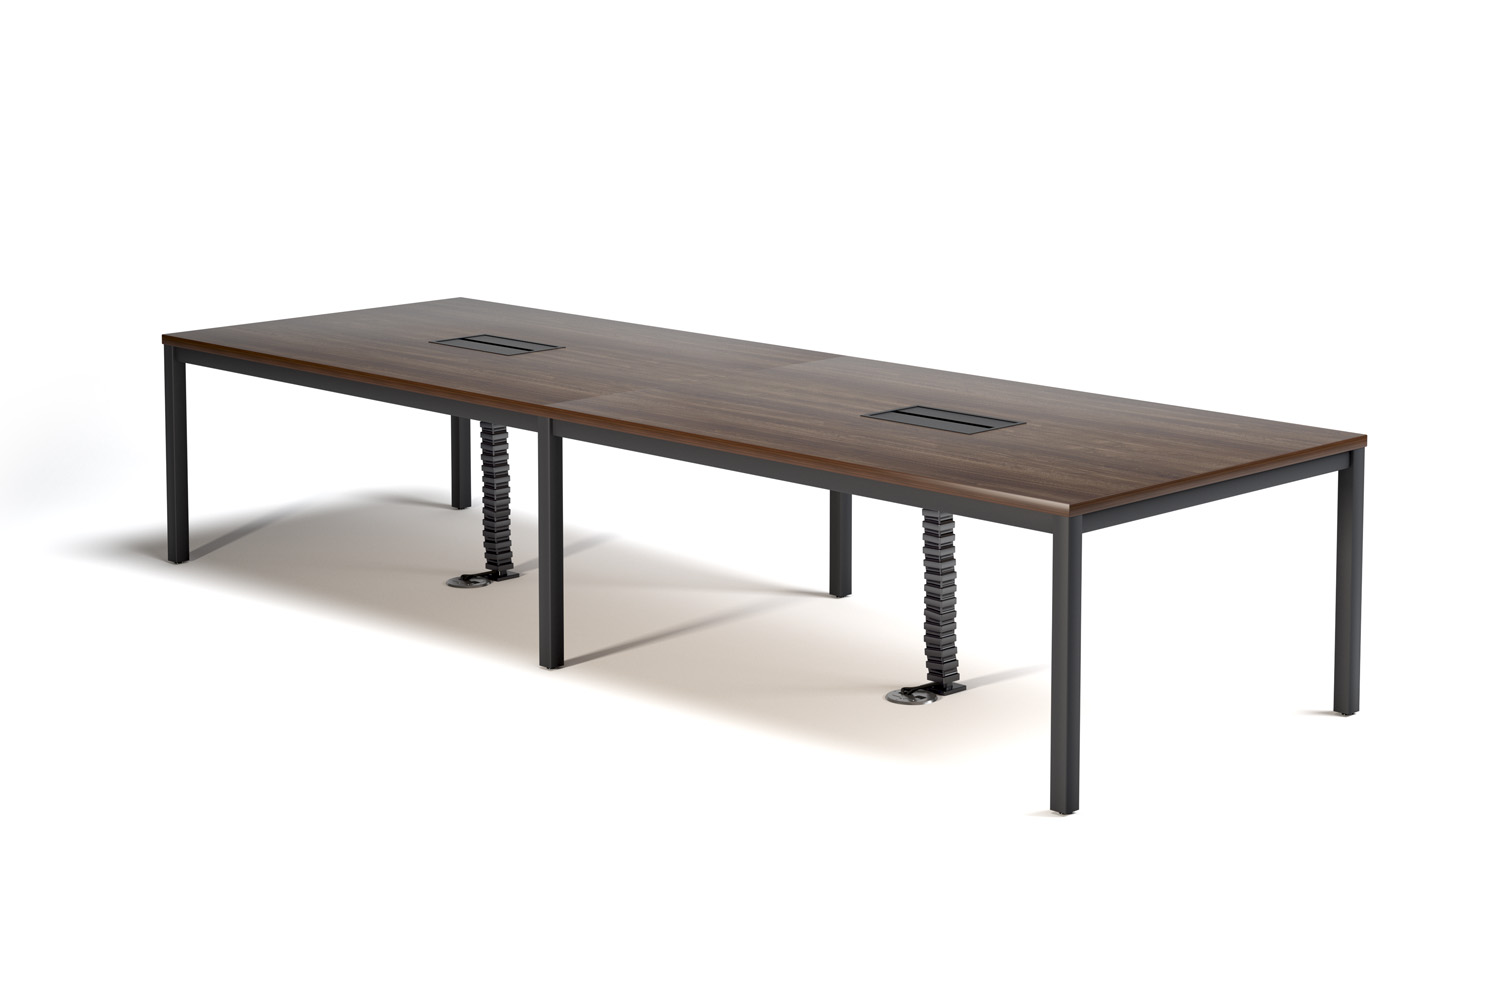 Pisa 48x144 Conference Table with Power Data Snake unit